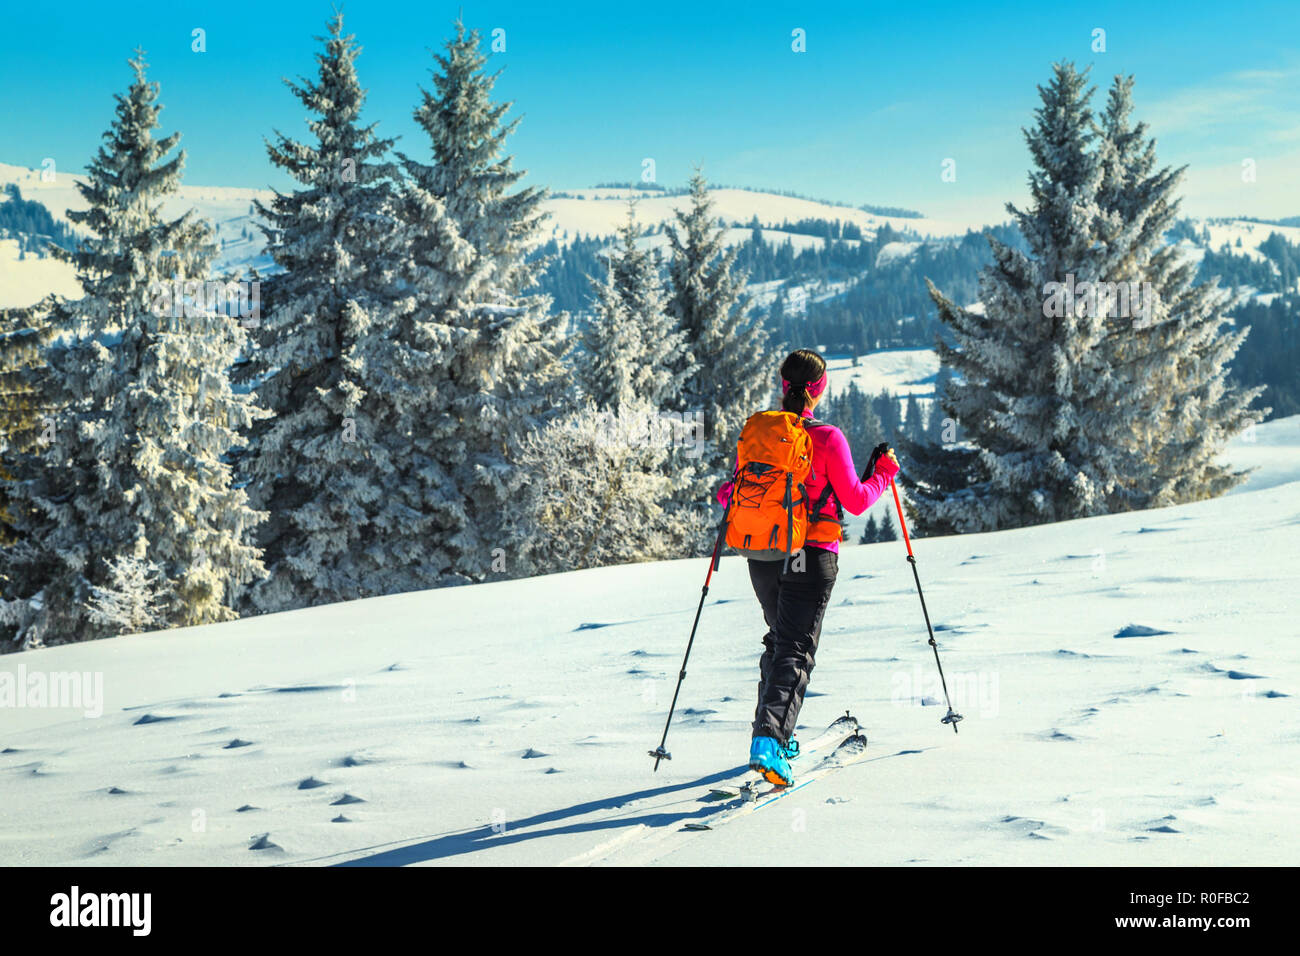 Ski touring in high alpine landscape with snowy pine trees. Adventure, winter activities, skitouring on the spectacular slopes, Transylvania,Carpathia Stock Photo